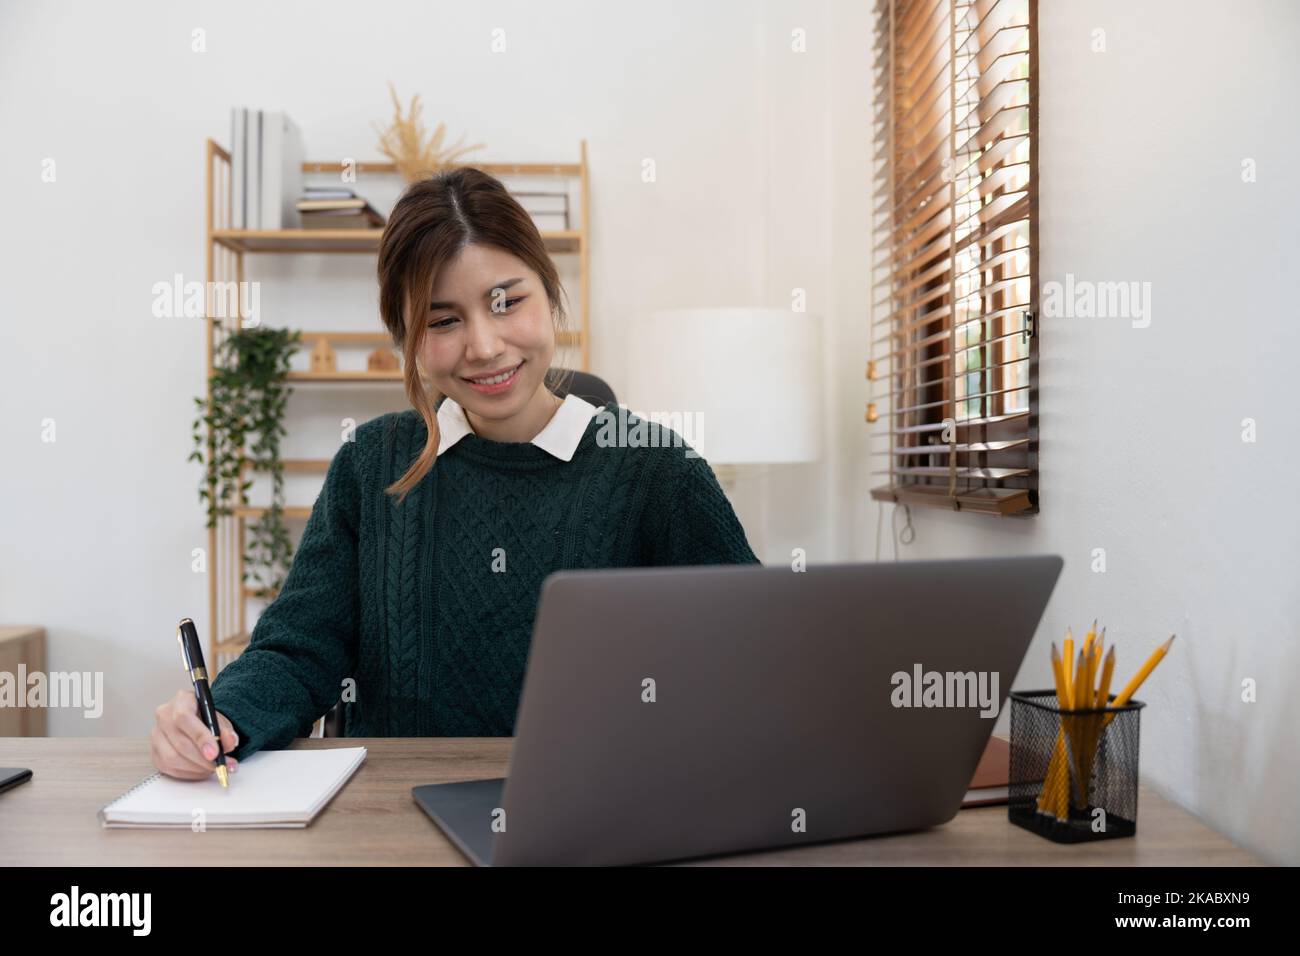 asian female student studying remotely from home, using a laptop, taking notes on notepad during online lesson, e-learning concept, smiling Stock Photo